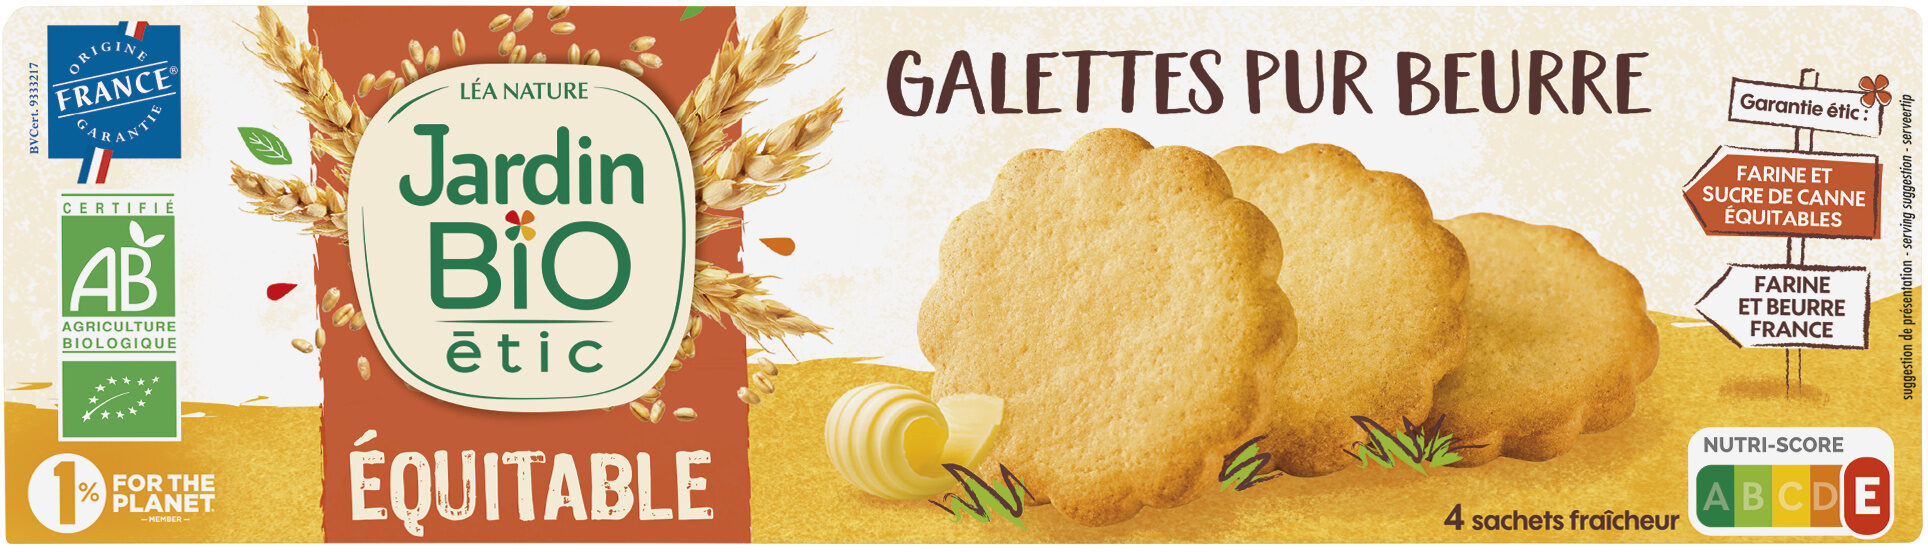 Galettes pur beurre - Producto - fr